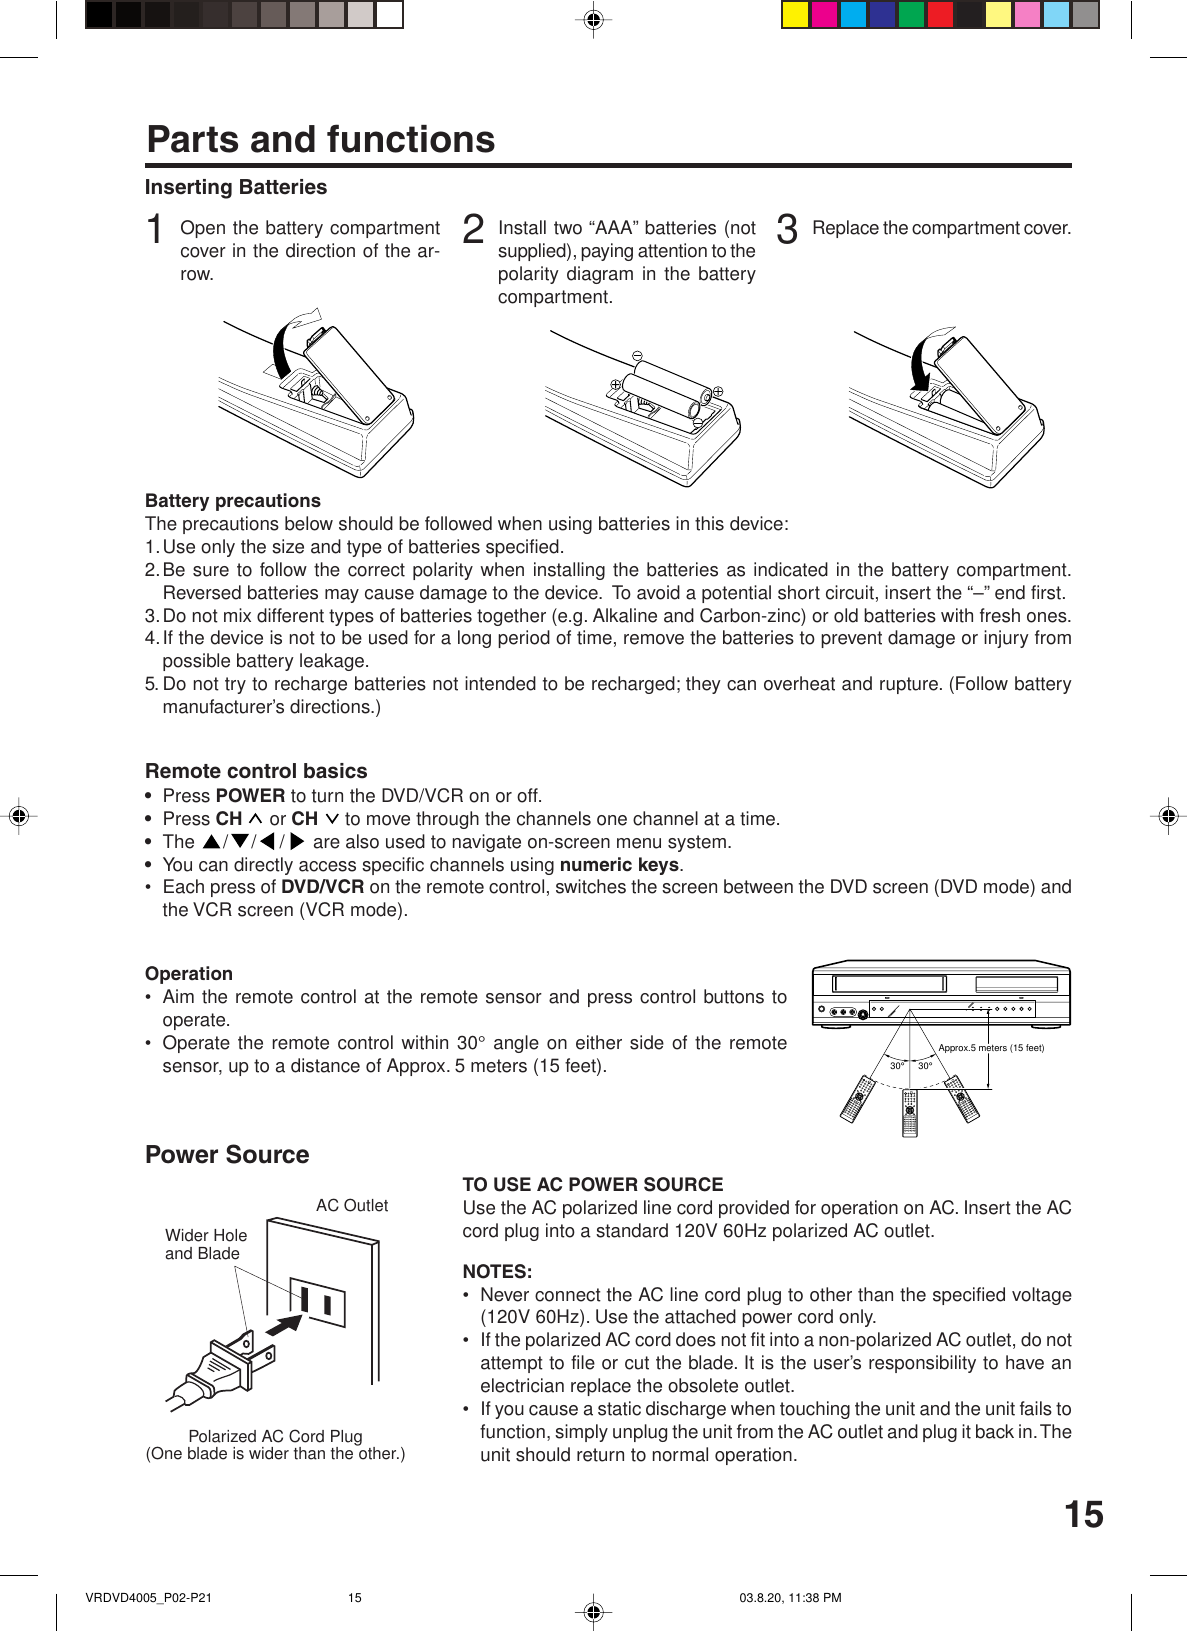 15Inserting BatteriesParts and functions3Replace the compartment cover.2Install two “AAA” batteries (notsupplied), paying attention to thepolarity diagram in the batterycompartment.1Open the battery compartmentcover in the direction of the ar-row.Battery precautionsThe precautions below should be followed when using batteries in this device:1.Use only the size and type of batteries specified.2.Be sure to follow the correct polarity when installing the batteries as indicated in the battery compartment.Reversed batteries may cause damage to the device.  To avoid a potential short circuit, insert the “–” end first.3.Do not mix different types of batteries together (e.g. Alkaline and Carbon-zinc) or old batteries with fresh ones.4.If the device is not to be used for a long period of time, remove the batteries to prevent damage or injury frompossible battery leakage.5. Do not try to recharge batteries not intended to be recharged; they can overheat and rupture. (Follow batterymanufacturer’s directions.)Remote control basics•Press POWER to turn the DVD/VCR on or off.•Press CH   or CH   to move through the channels one channel at a time.•The  /// are also used to navigate on-screen menu system.•You can directly access specific channels using numeric keys.• Each press of DVD/VCR on the remote control, switches the screen between the DVD screen (DVD mode) andthe VCR screen (VCR mode).Operation• Aim the remote control at the remote sensor and press control buttons tooperate.• Operate the remote control within 30° angle on either side of the remotesensor, up to a distance of Approx. 5 meters (15 feet).Polarized AC Cord Plug(One blade is wider than the other.)AC OutletWider Holeand BladePower SourceTO USE AC POWER SOURCEUse the AC polarized line cord provided for operation on AC. Insert the ACcord plug into a standard 120V 60Hz polarized AC outlet.NOTES:• Never connect the AC line cord plug to other than the specified voltage(120V 60Hz). Use the attached power cord only.• If the polarized AC cord does not fit into a non-polarized AC outlet, do notattempt to file or cut the blade. It is the user’s responsibility to have anelectrician replace the obsolete outlet.• If you cause a static discharge when touching the unit and the unit fails tofunction, simply unplug the unit from the AC outlet and plug it back in. Theunit should return to normal operation.30°30°Approx.5 meters (15 feet)VRDVD4005_P02-P21 03.8.20, 11:38 PM15